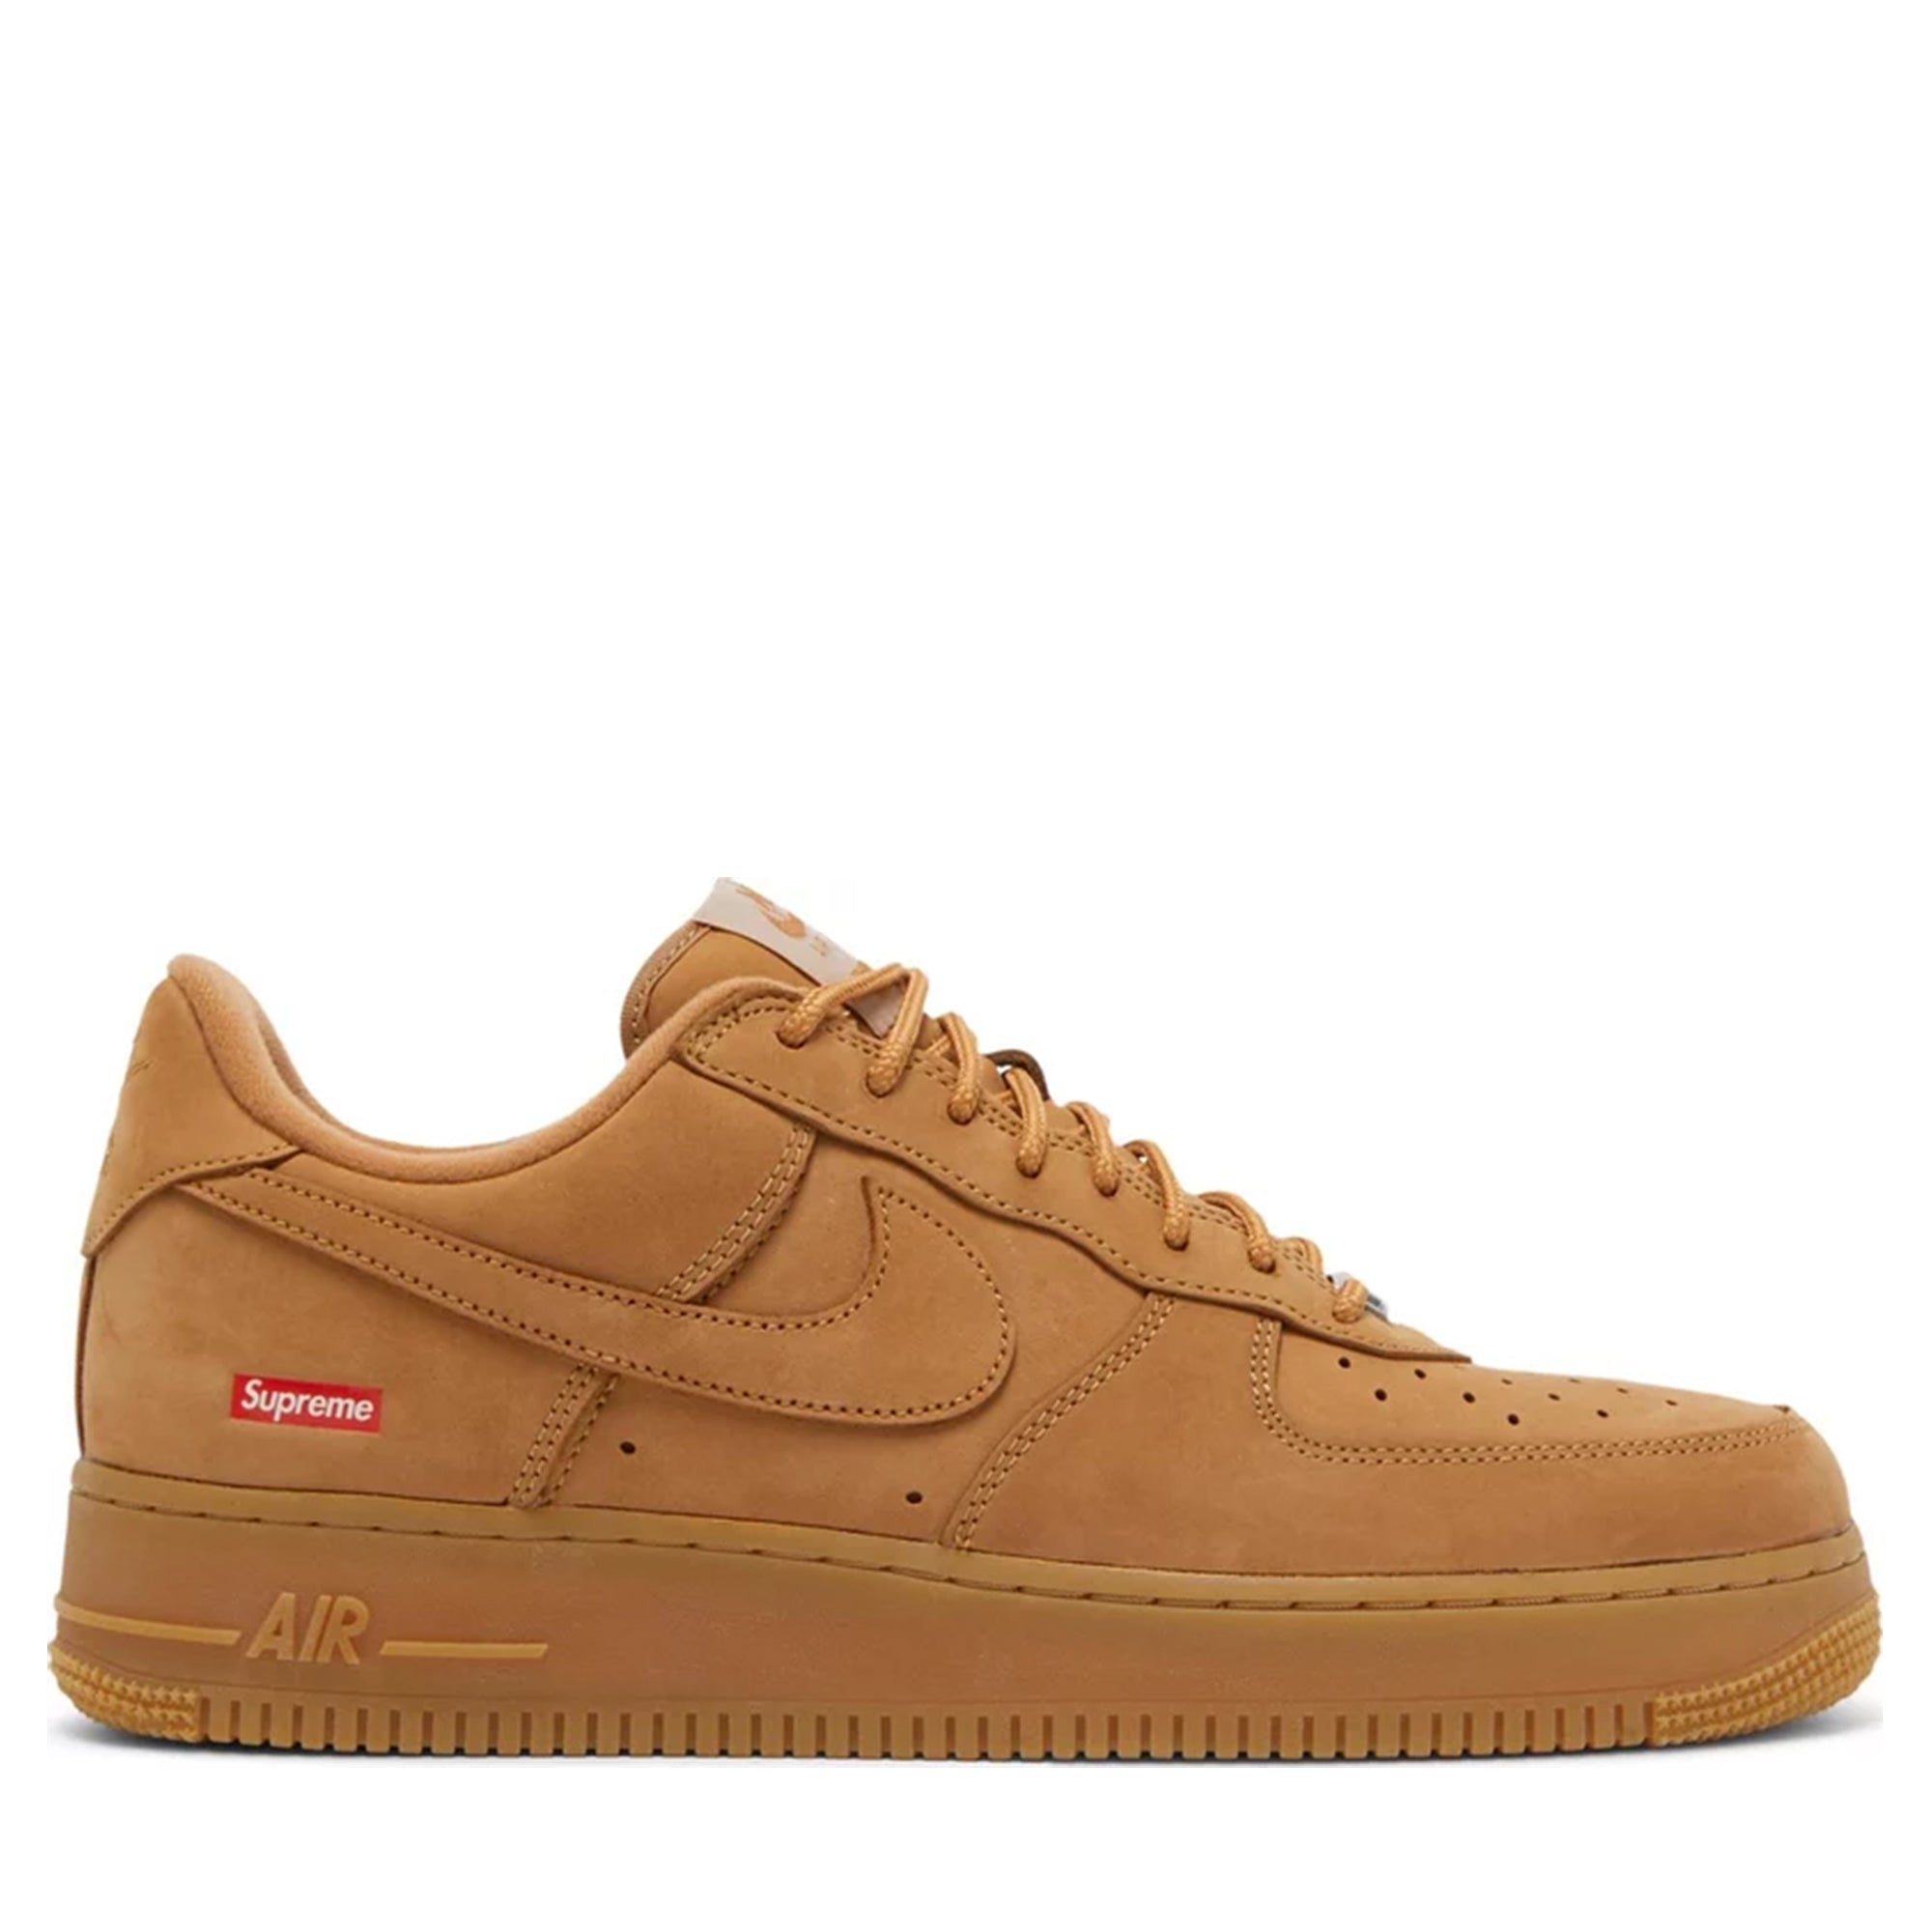 Nike Air Force 1 Low SP Supreme Wheat-PLUS